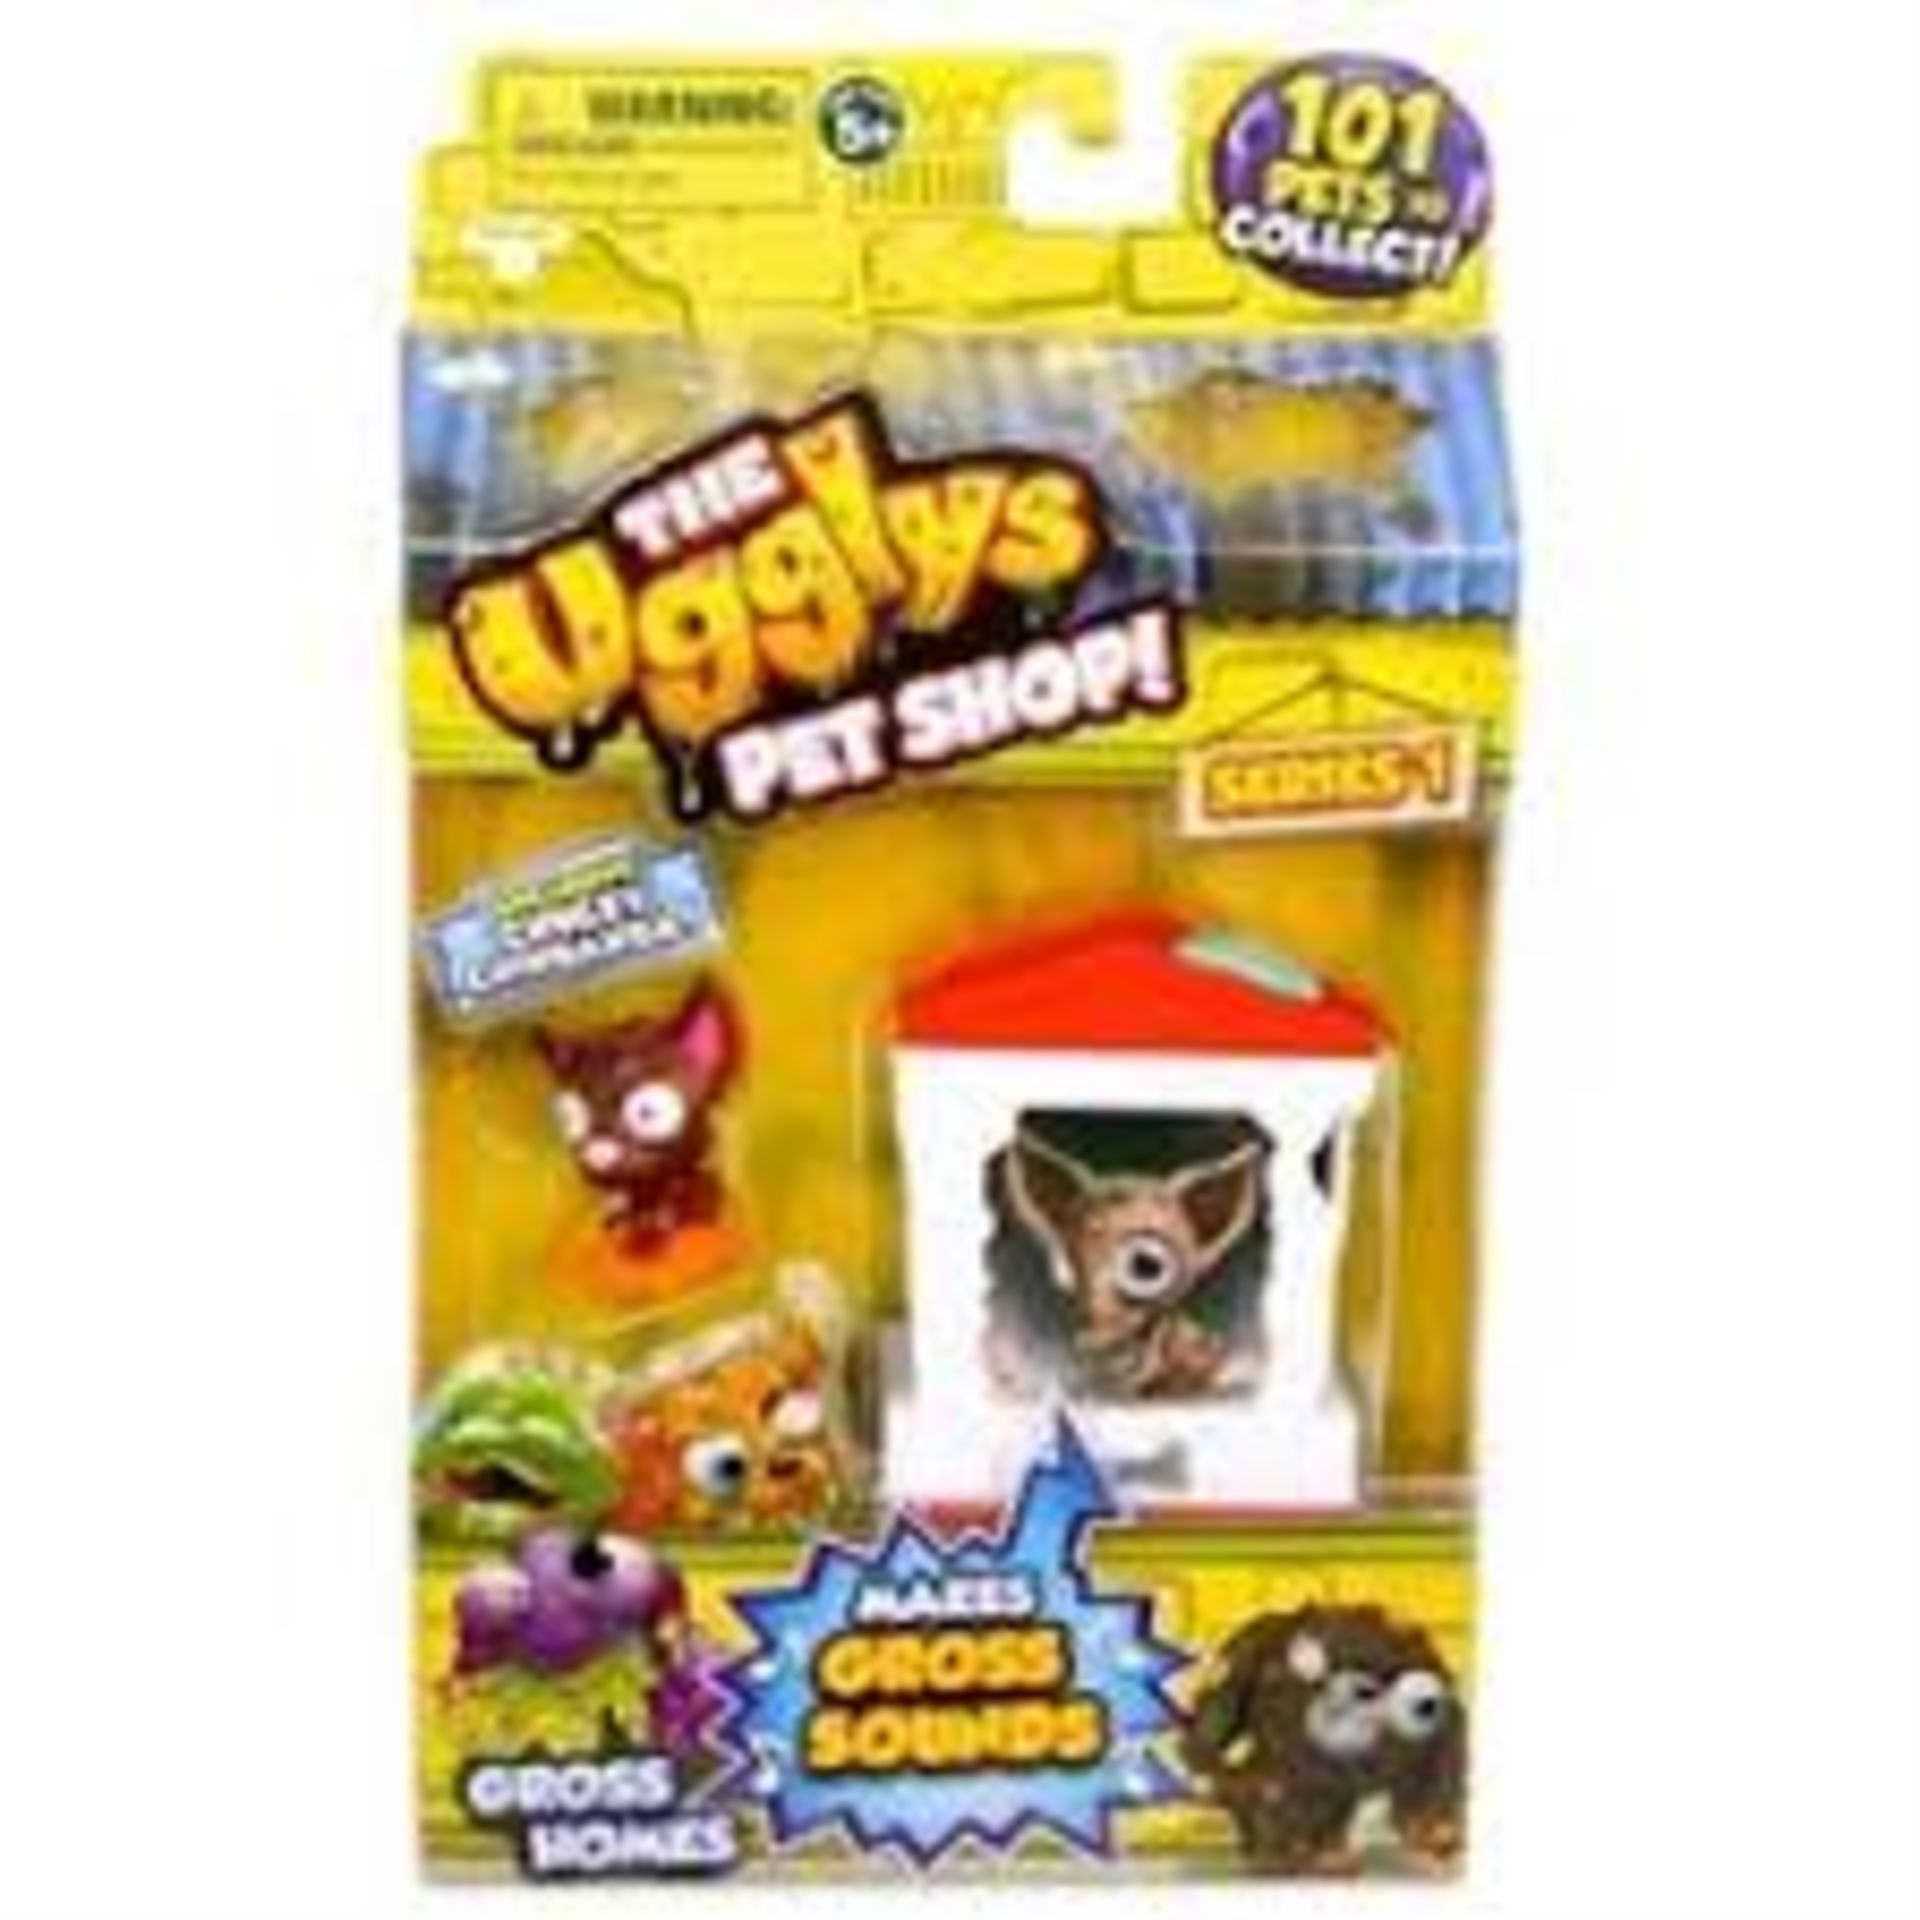 290 x The Ugglys Pet Shop!, Series 1 Gross Homes, Mutt Hut with Exclusive Blubbering Bulldog by Moos - Image 2 of 2